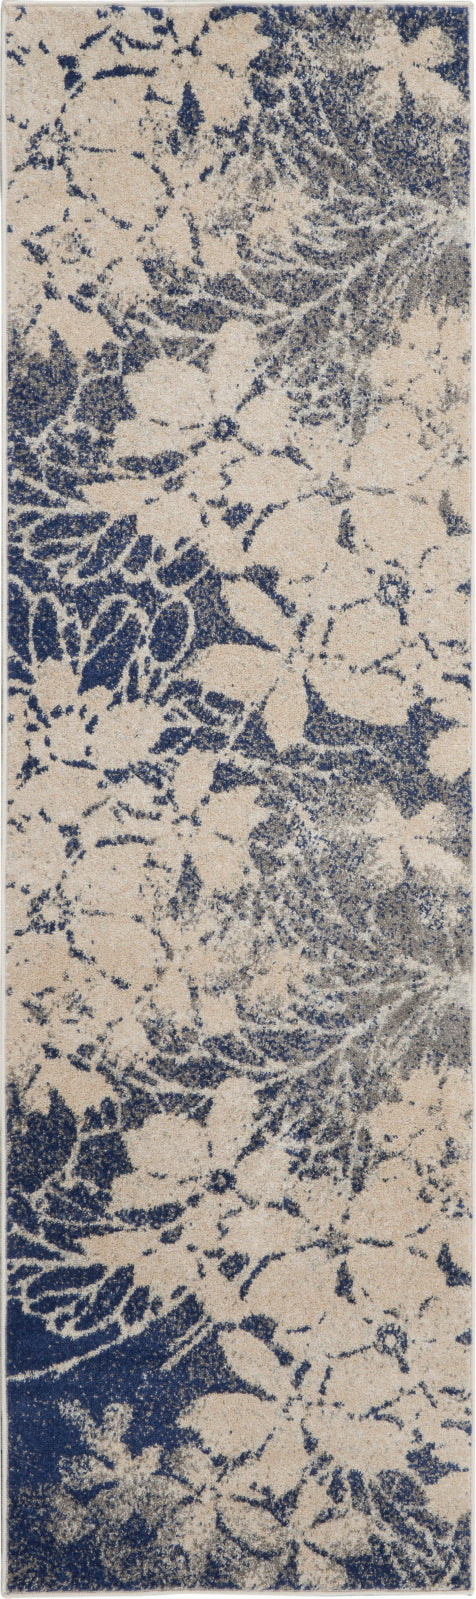 Tranquil TRA08 Beige/Navy Area Rug by Nourison main image